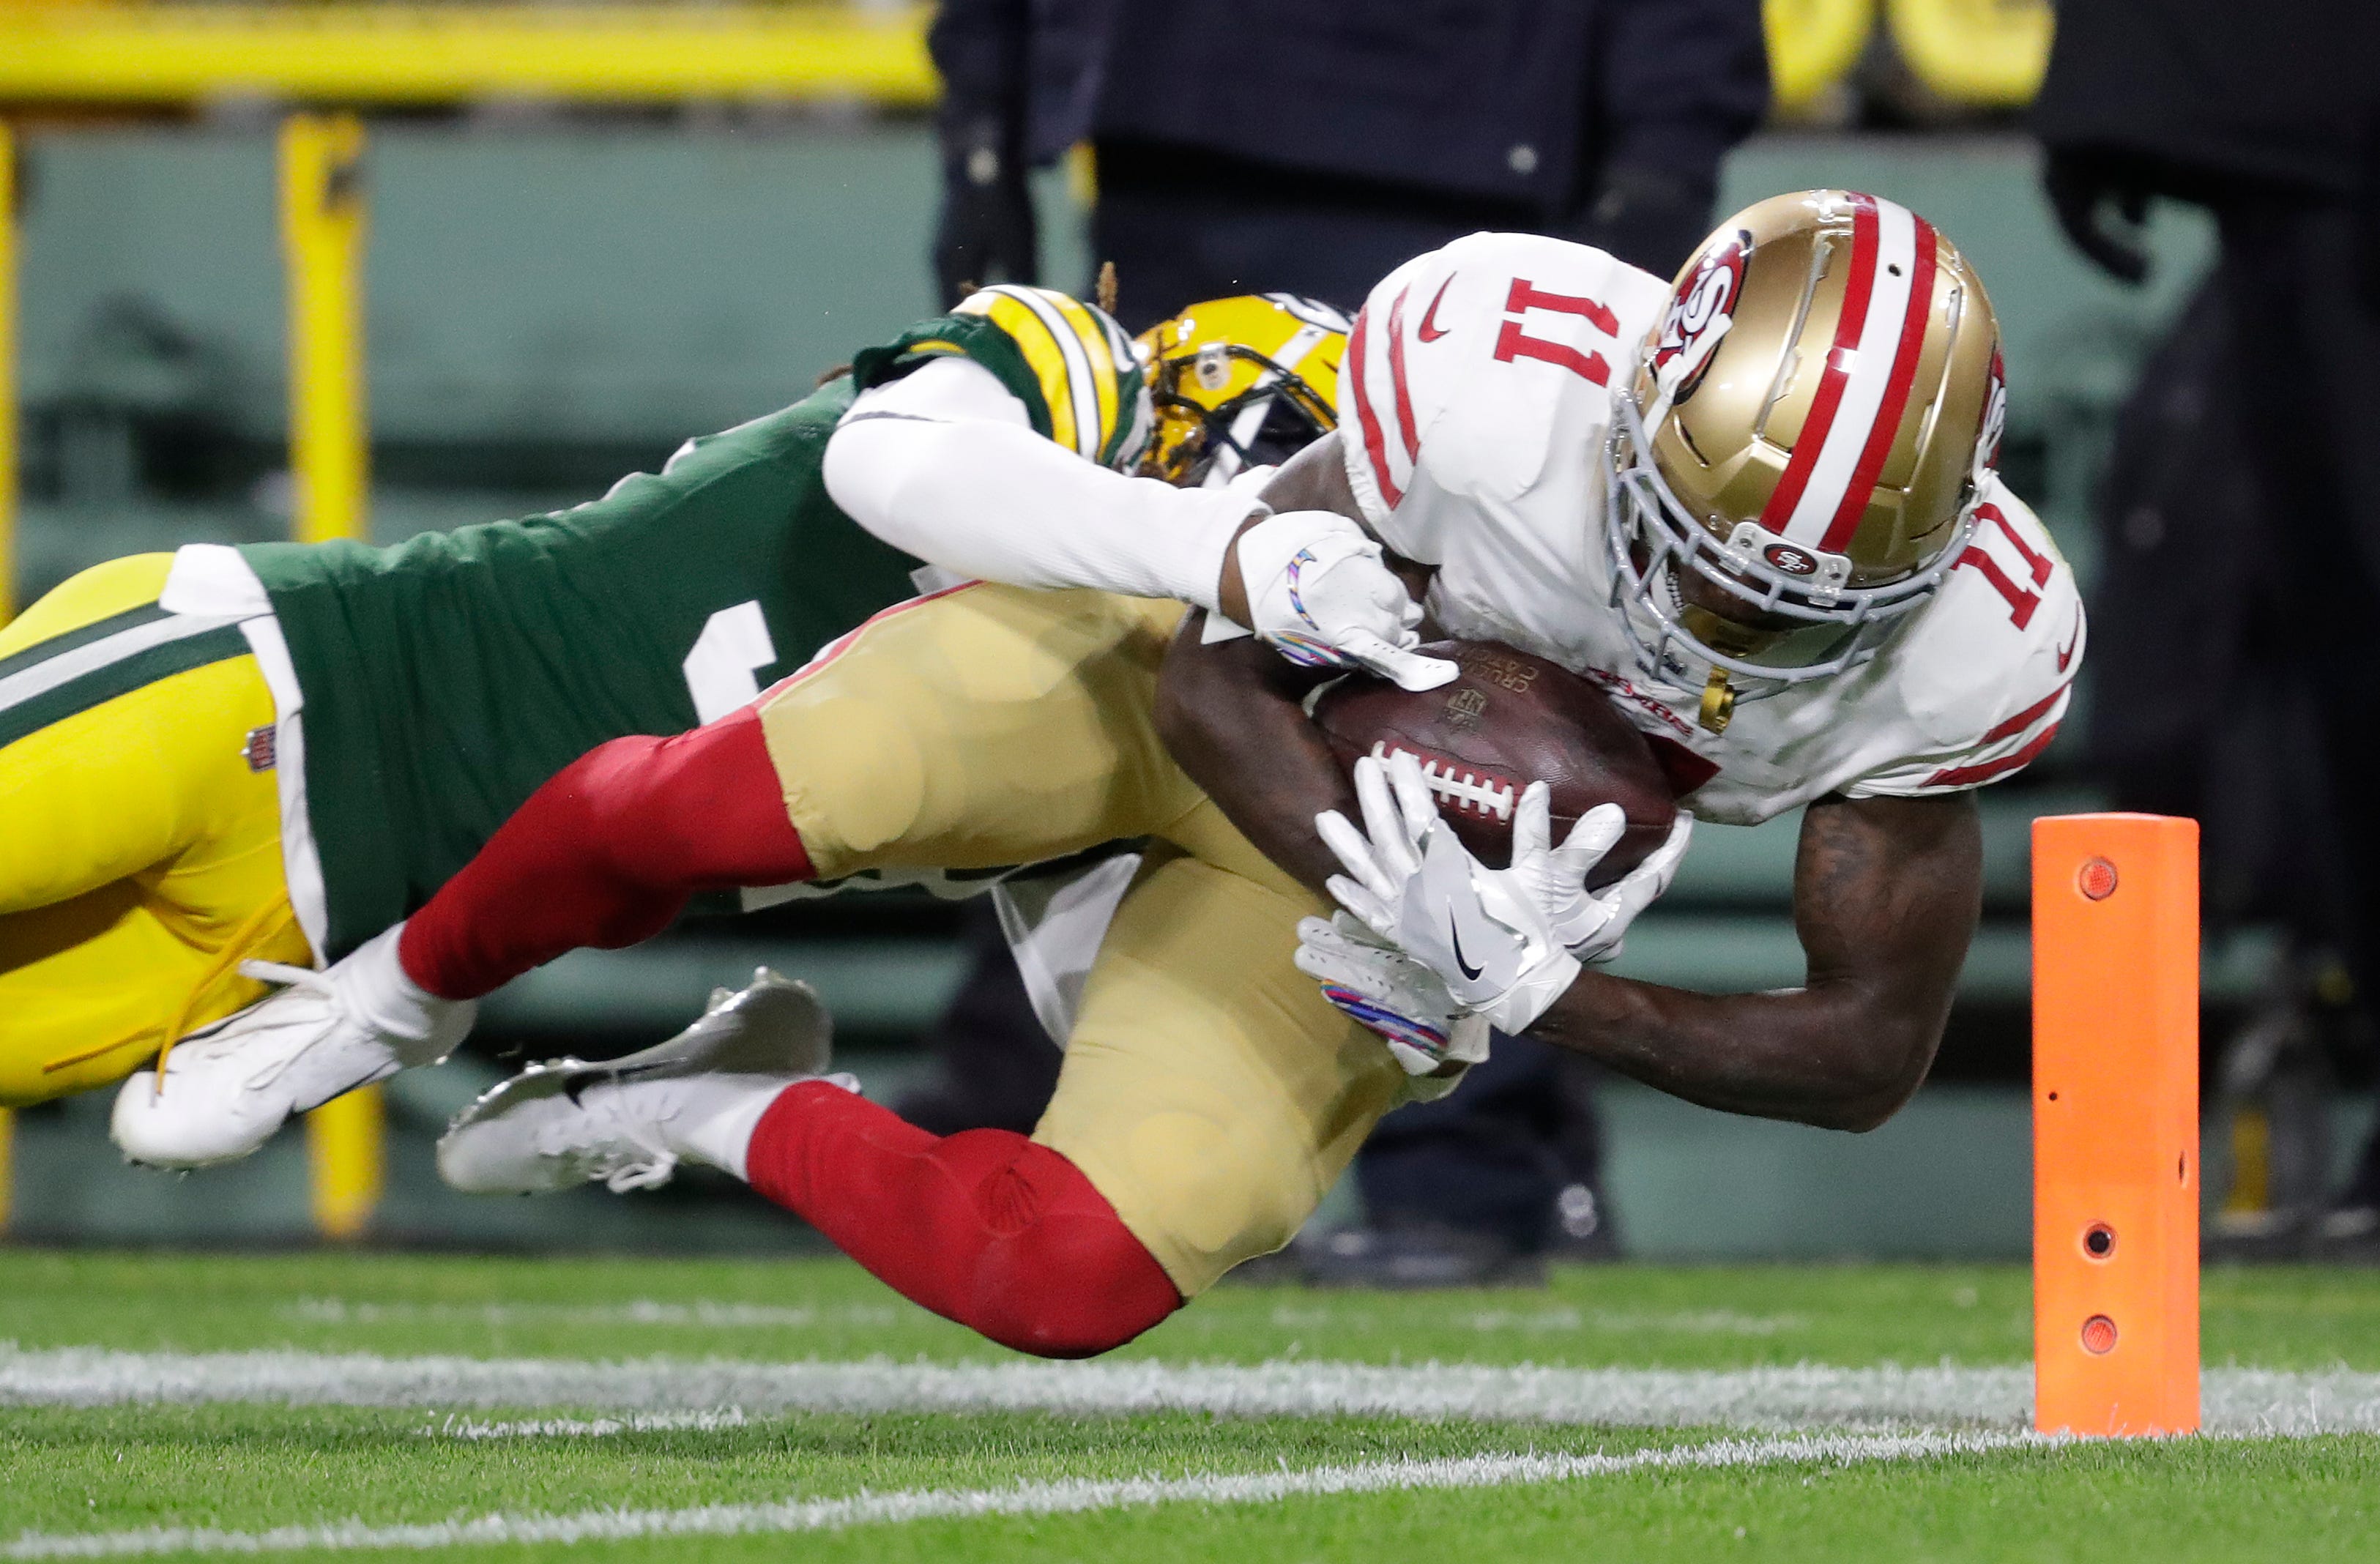 San Francisco 49ers wide receiver Marquise Goodwin (11) dives into the end zone for a touchdown against Green Bay Packers cornerback Tramon Williams (38) in the second quarter during their football game Monday, Oct. 15, 2018, at Lambeau Field in Green Bay, Wis. 
Dan Powers/USA TODAY NETWORK-Wisconsin